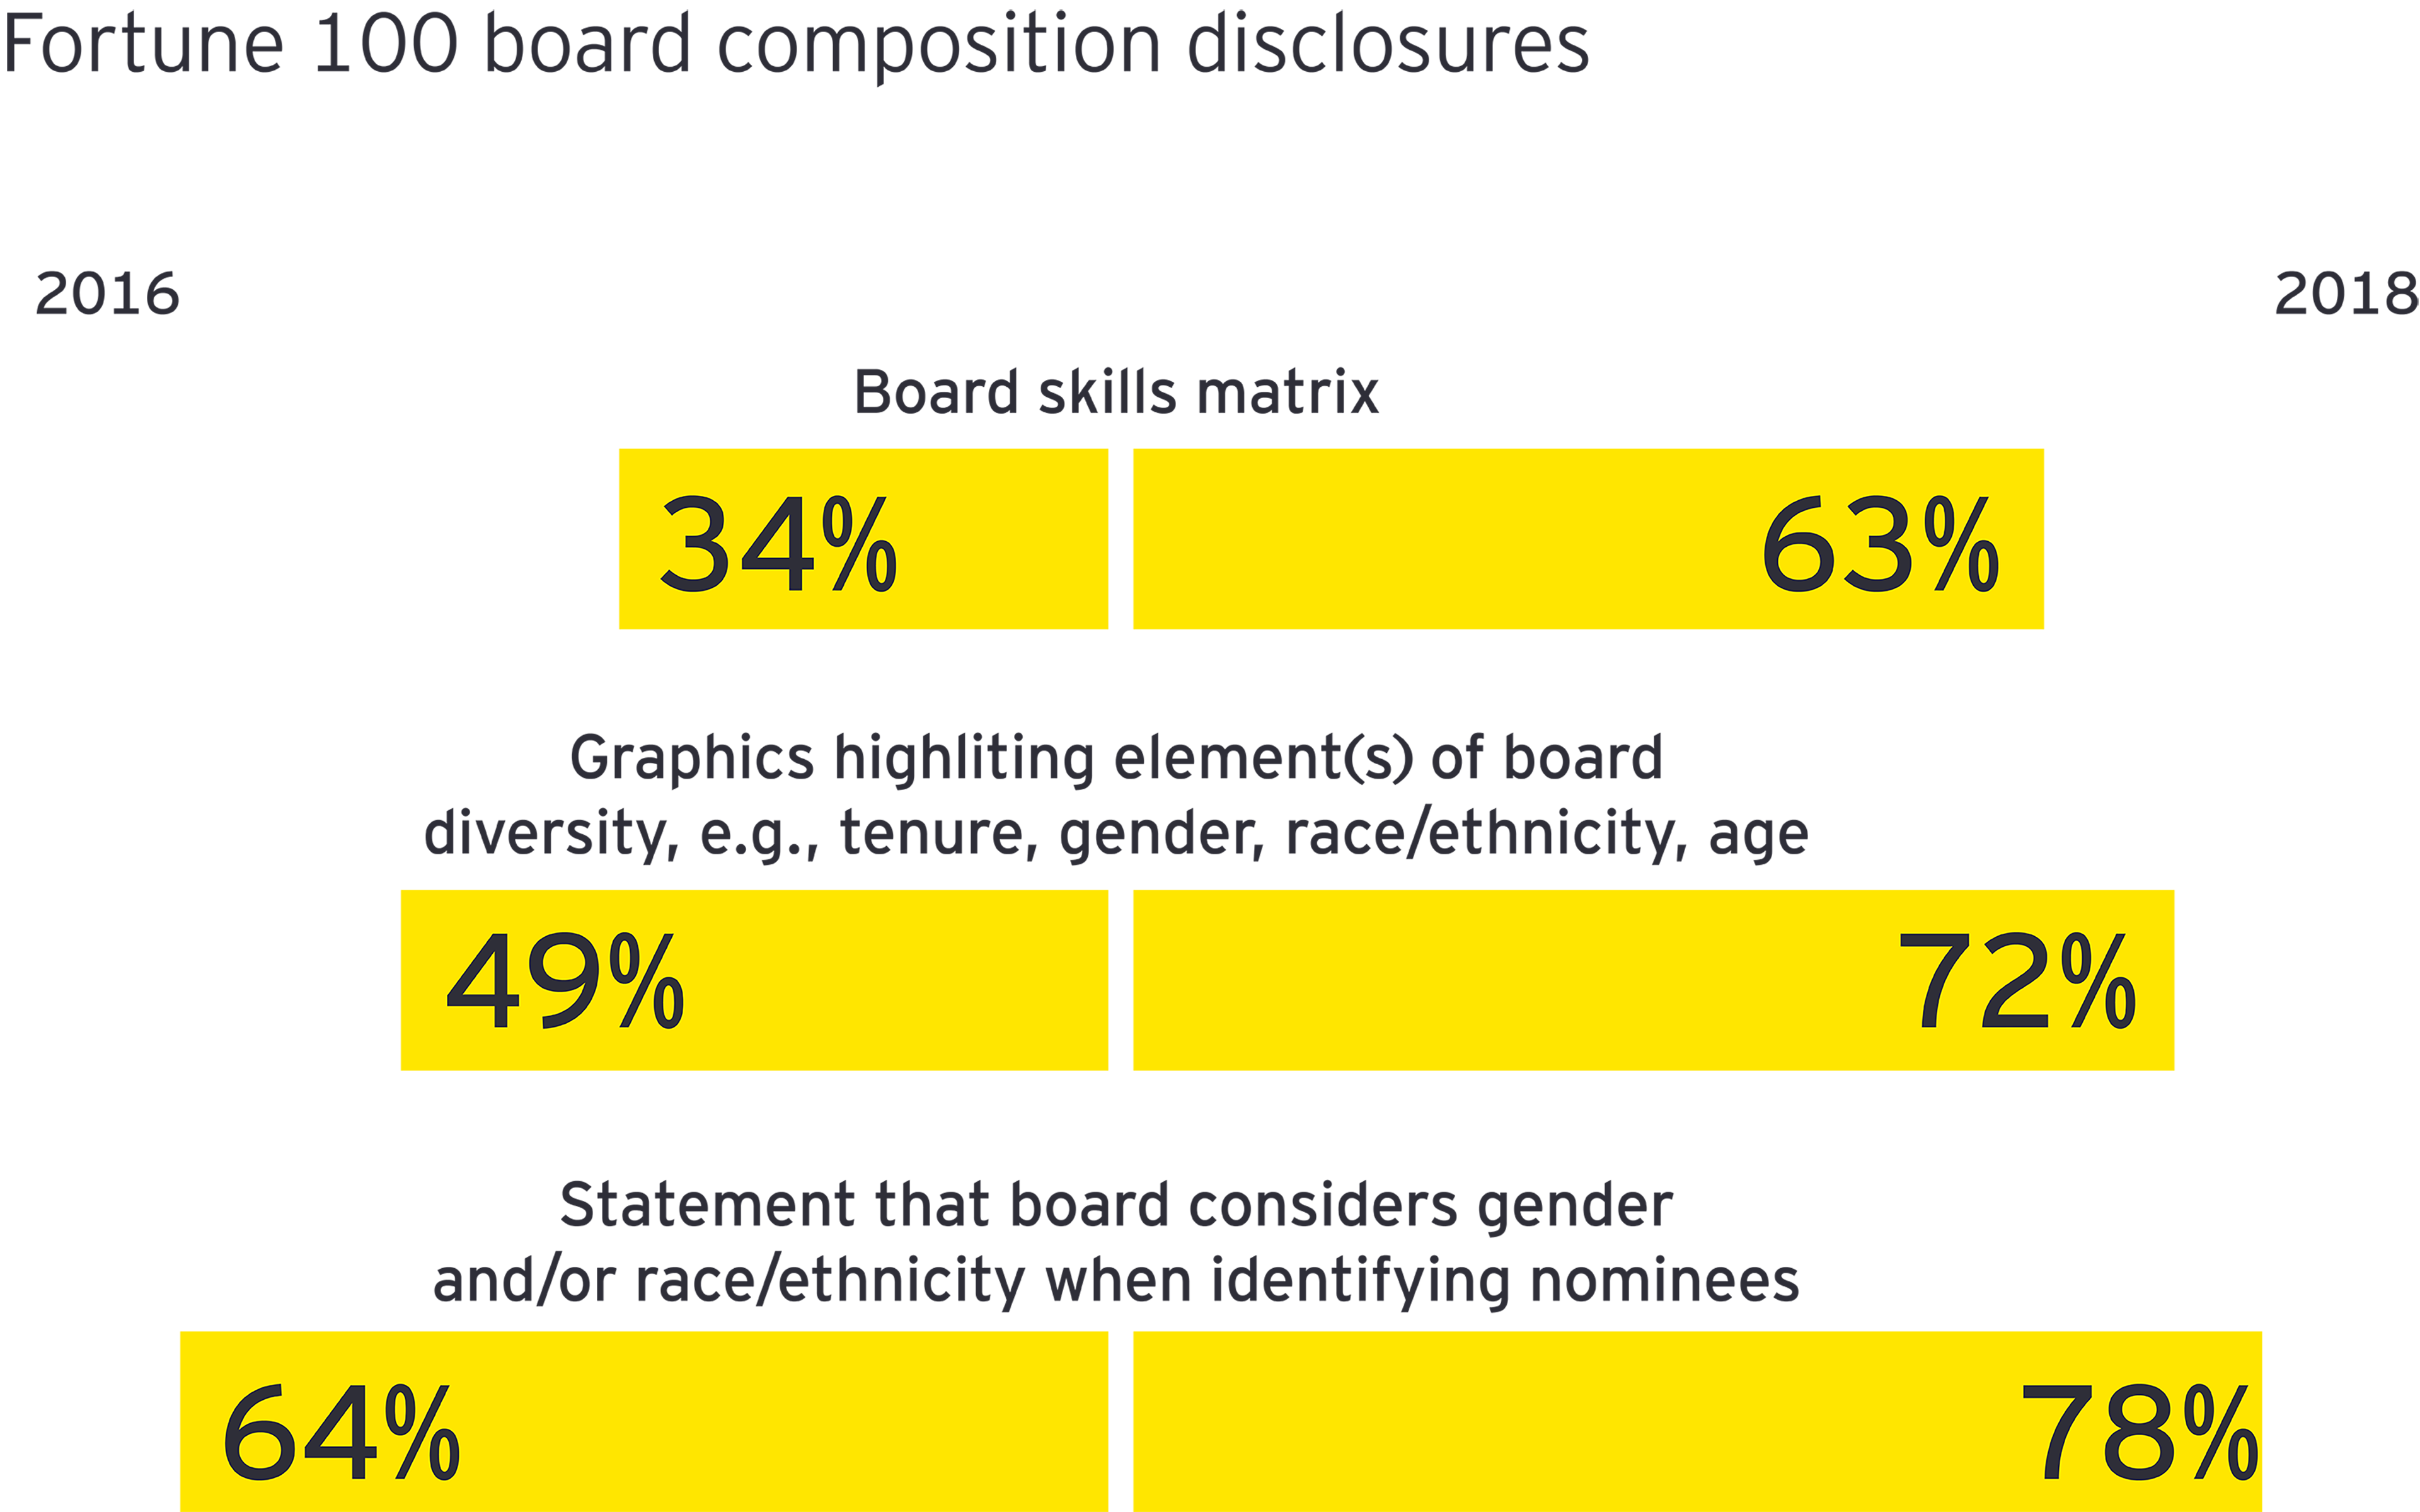 Fortune 100 board composition disclosures